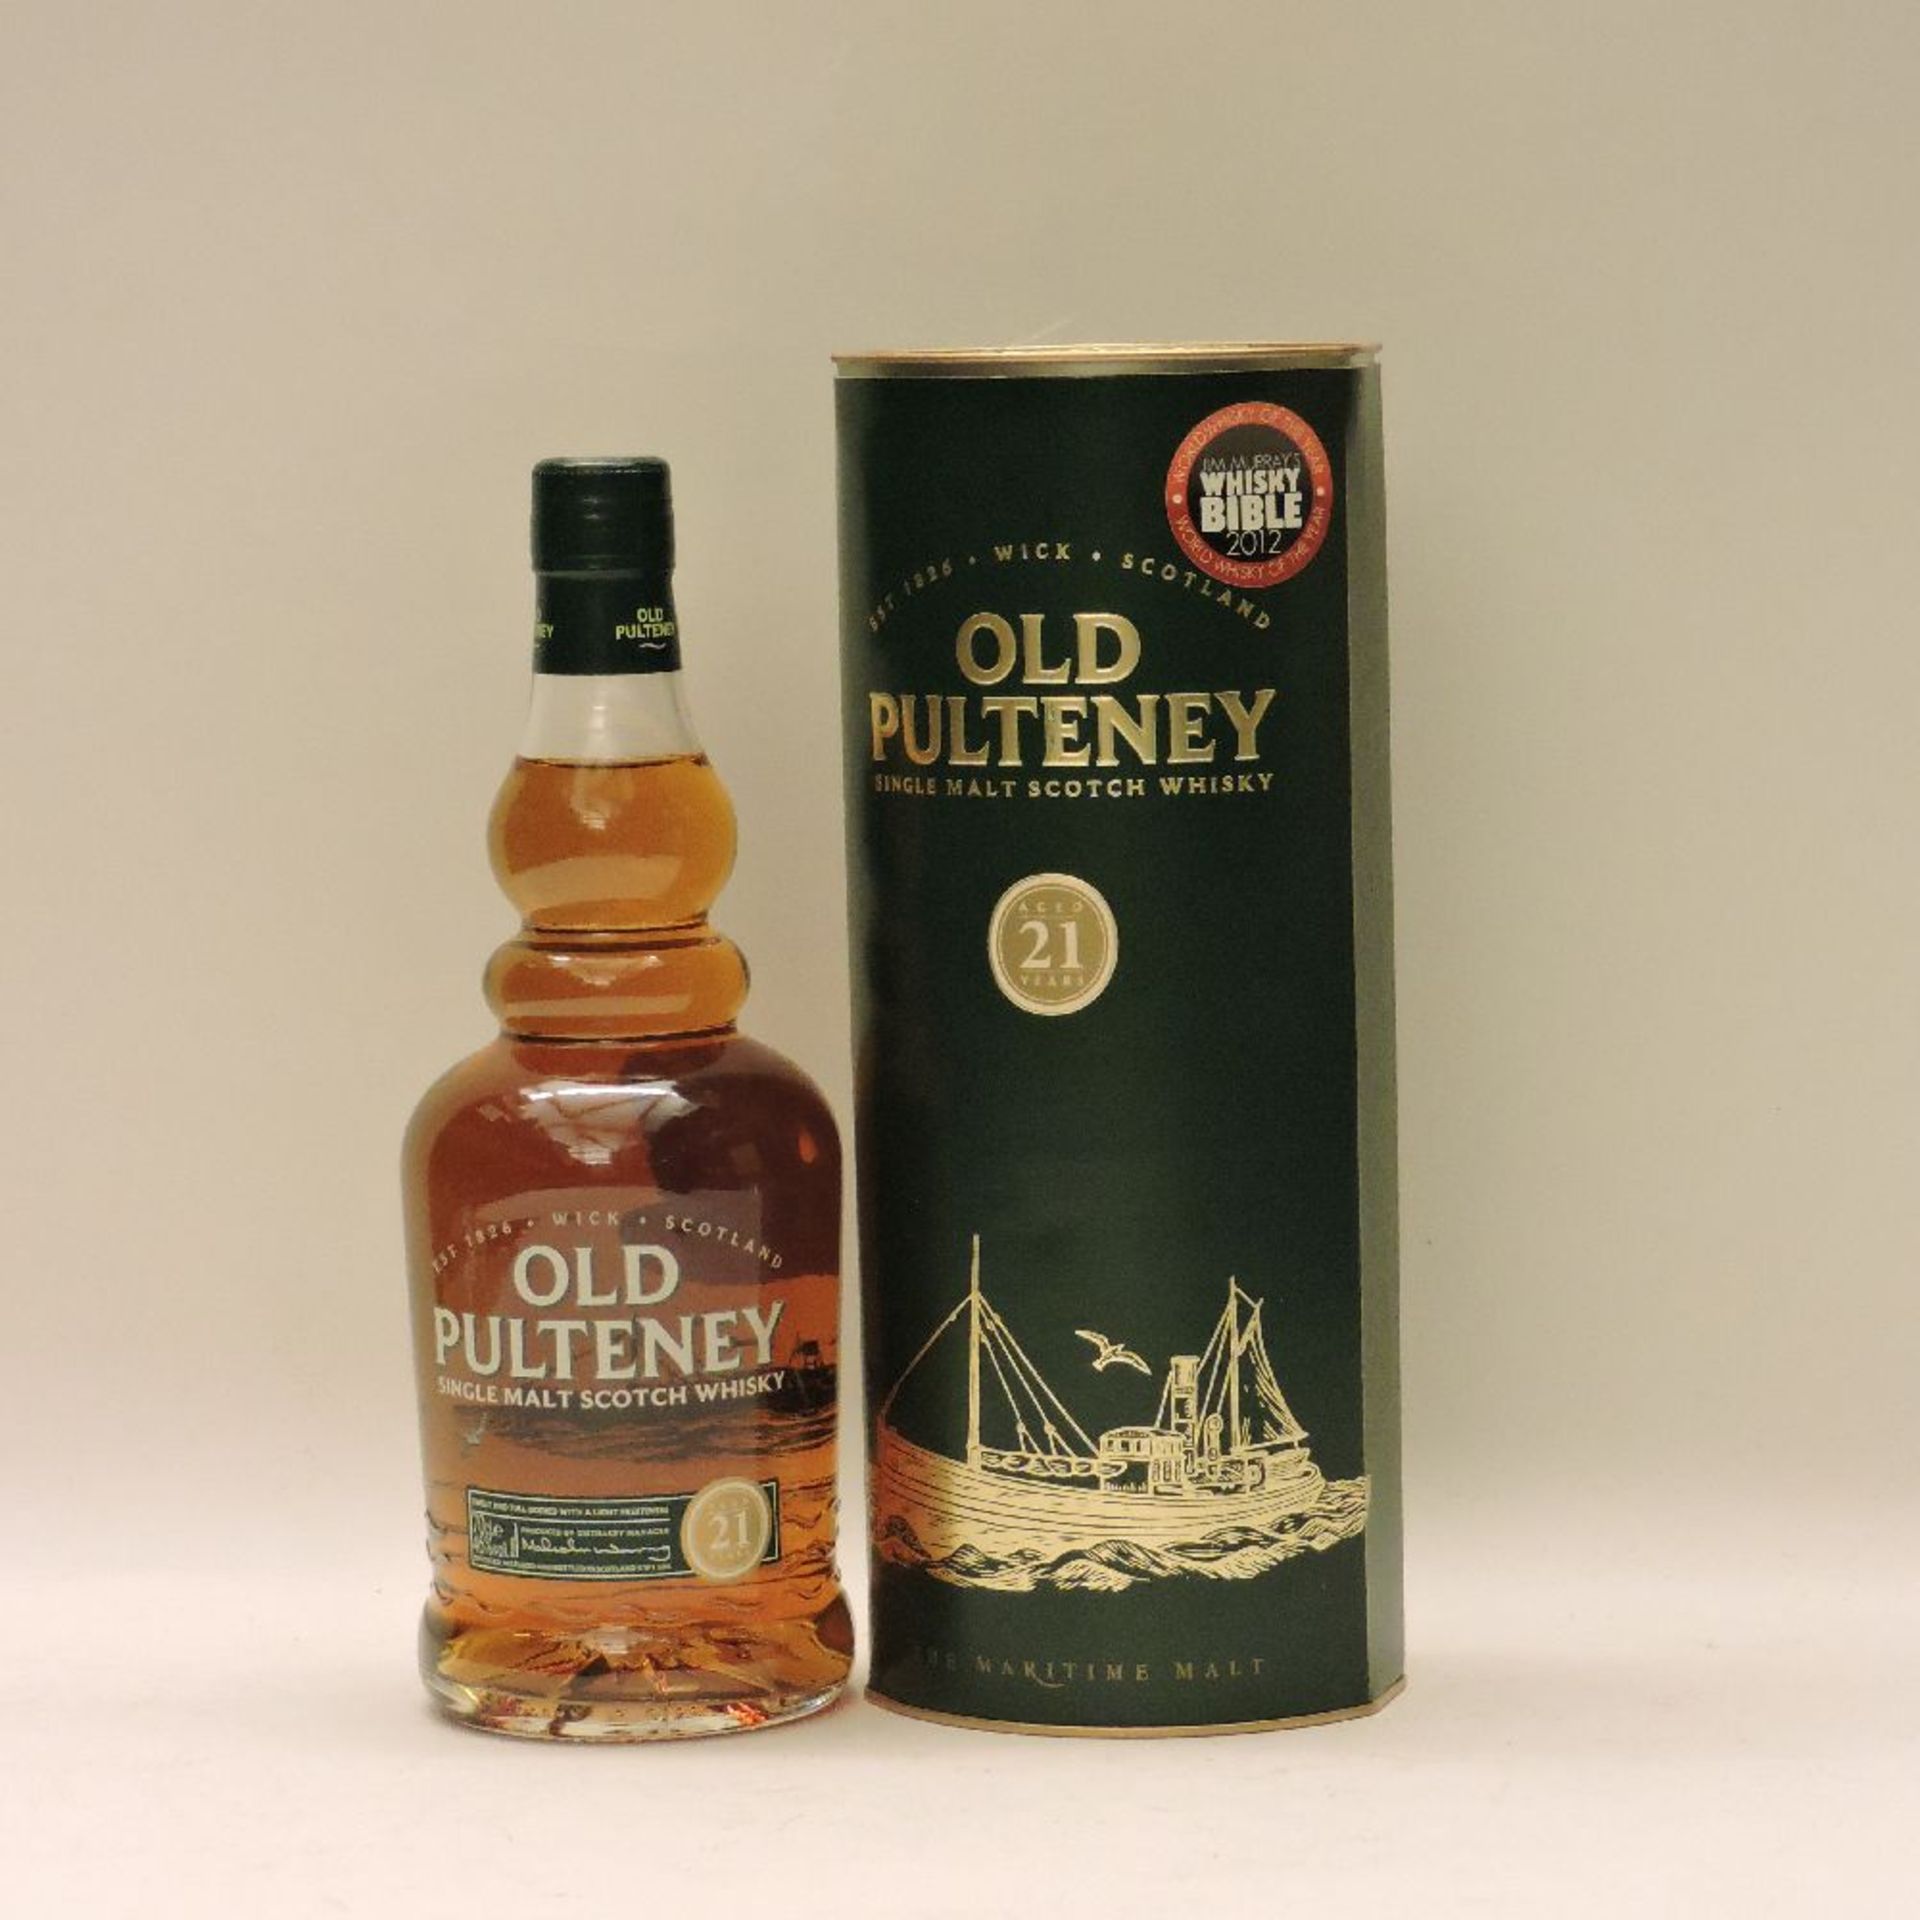 Old Pulteney Single Malt Scotch Whisky, Aged 21 Years, one bottle (in tin)